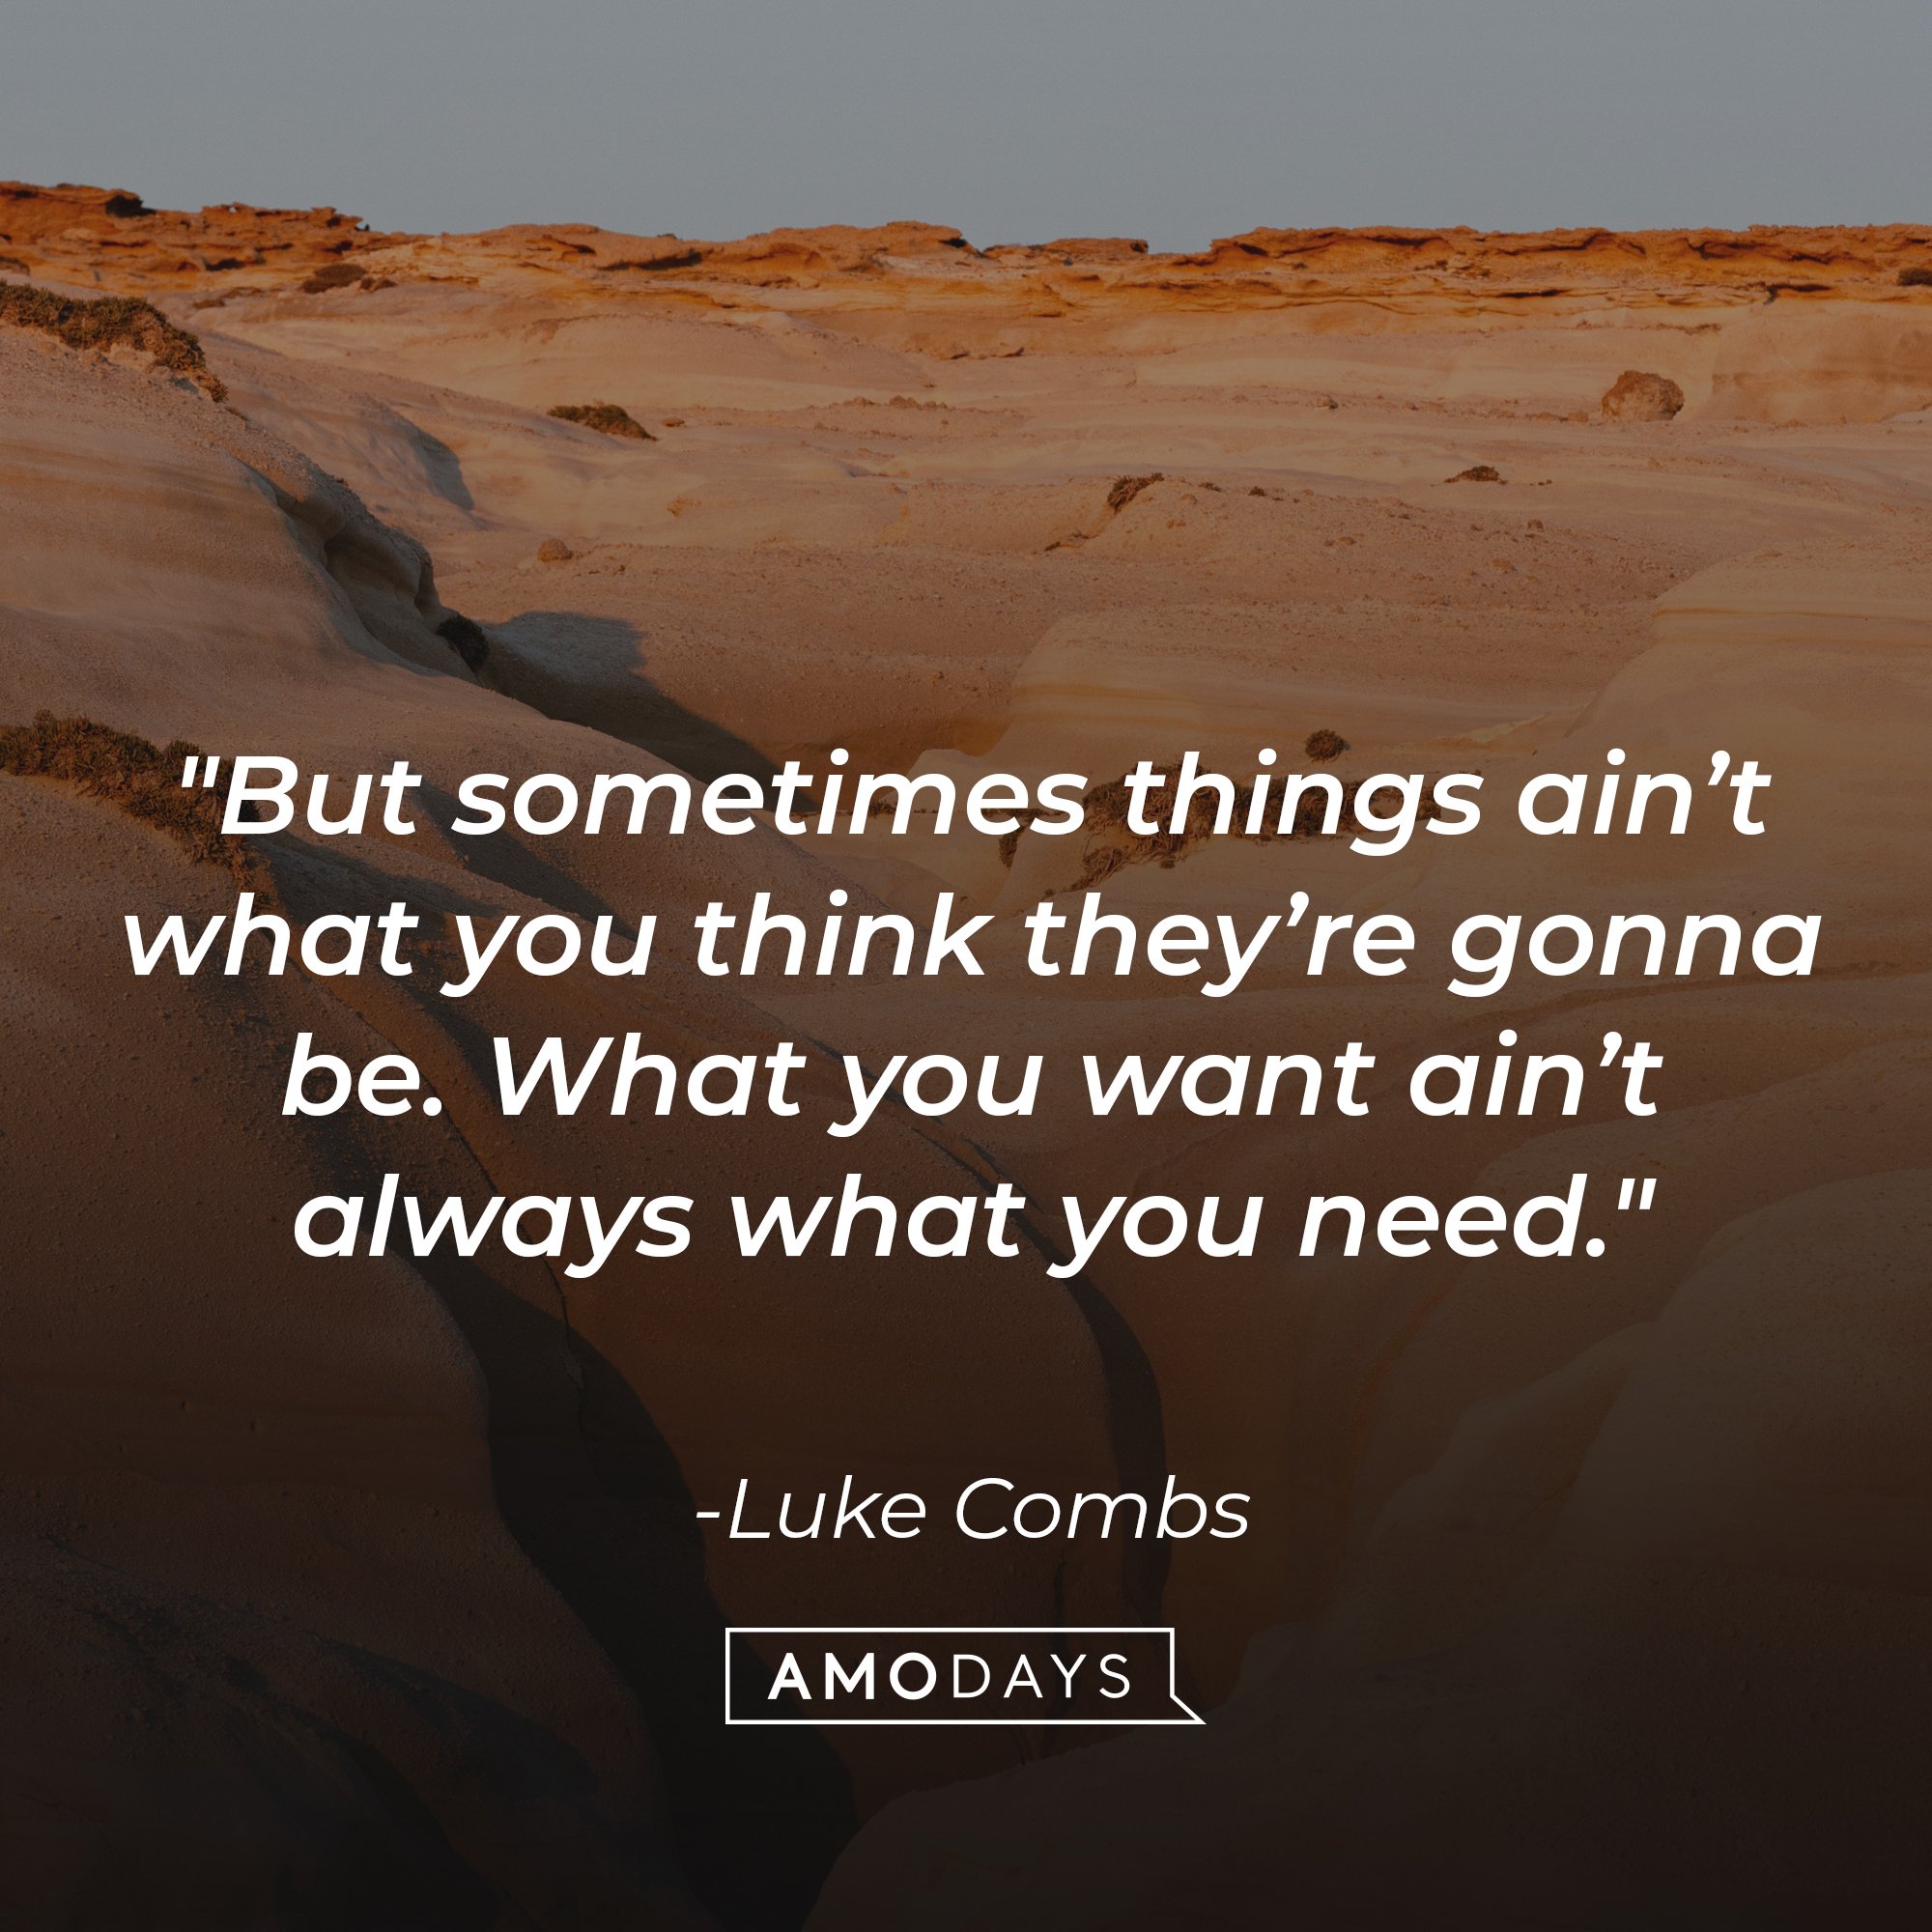 Luke Combs's quote"But sometimes things ain’t what you think they’re gonna be. What you want ain’t always what you need." | Source: Unsplash.com